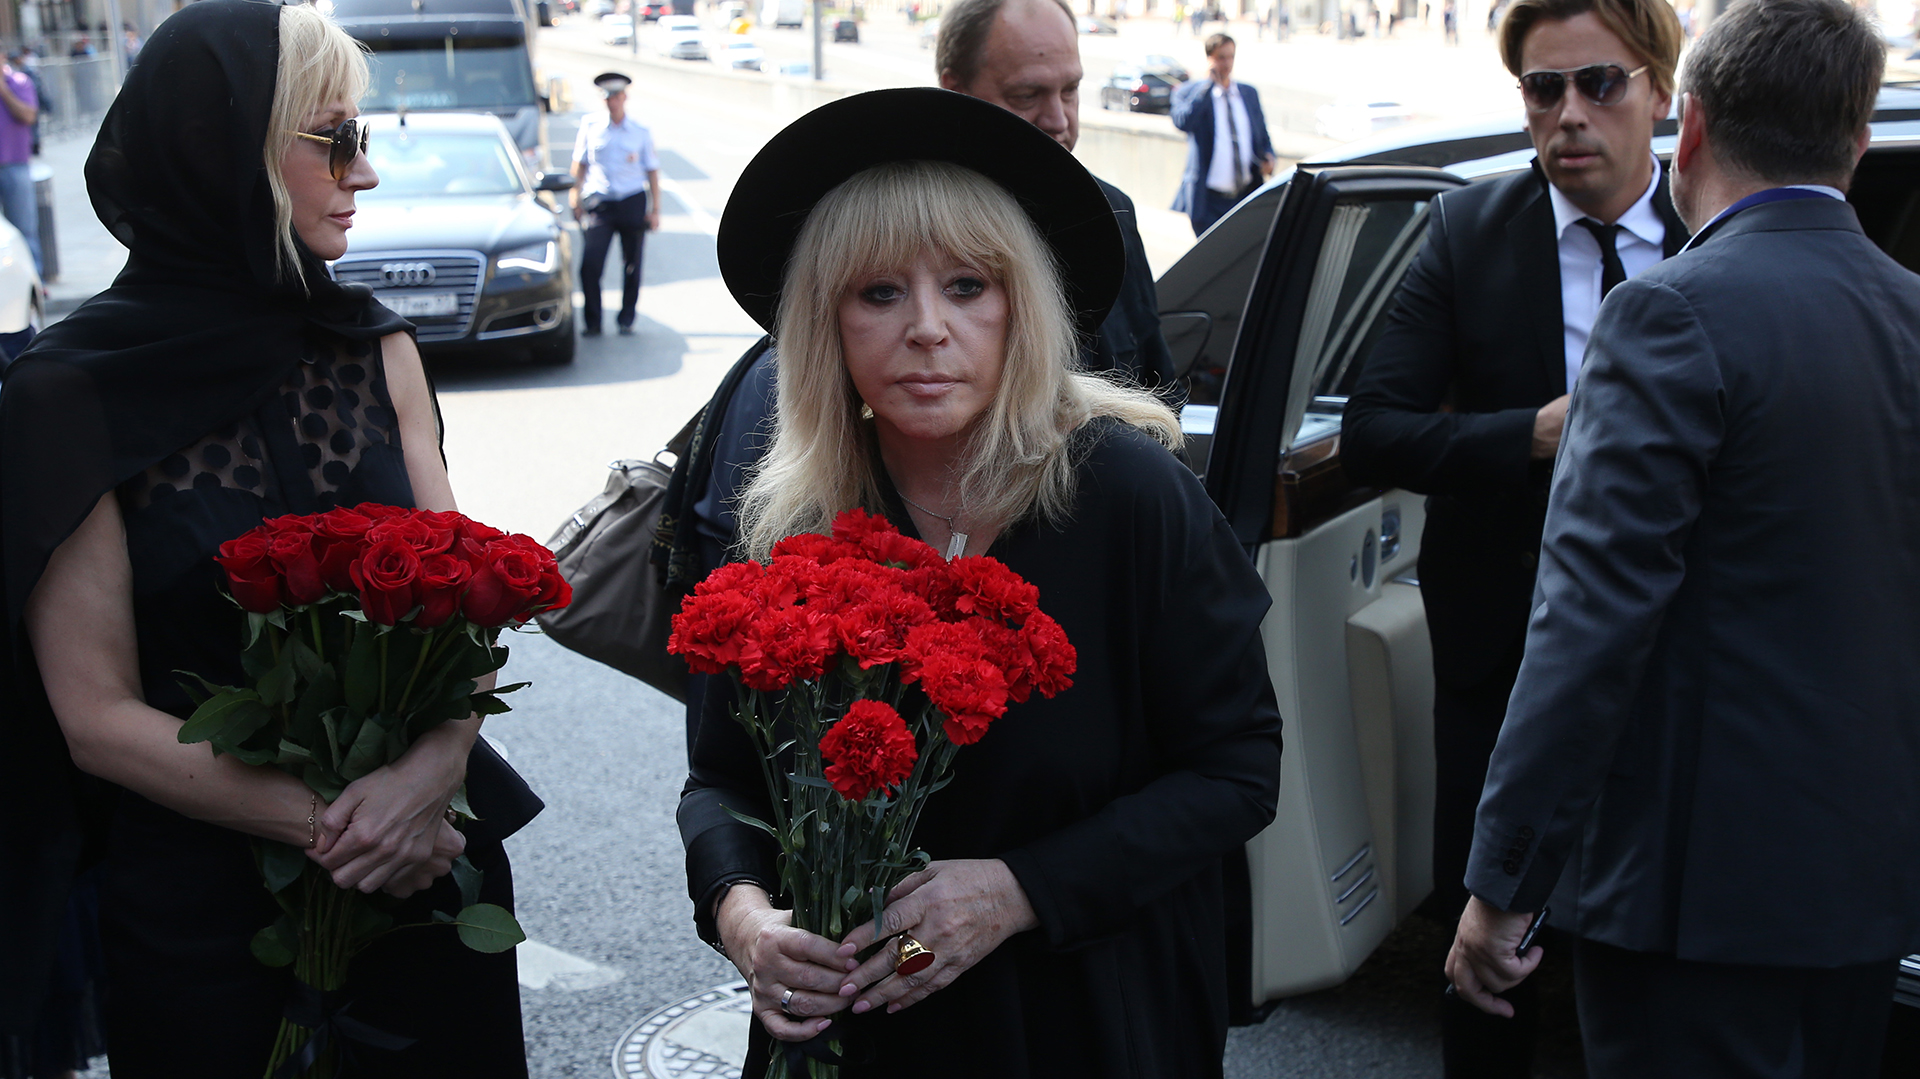 MOSCOW, RUSSIA - SEPTEMBER,2  (RUSSIA OUT) Russian pop star Alla Pugacheva (C), her husband Maksim Galkin (R) and her daughter Kristina Orbakaite (L) arrive for the funeral of Russian singer and State Duma Deputy Joseph Kobzon on September 2, 2018 in Moscow, Russia. The famous Soviet era singer Jozeph Kobzon died in Moscow at the age of 81. (Photo by Mikhail Svetlov/Getty Images)